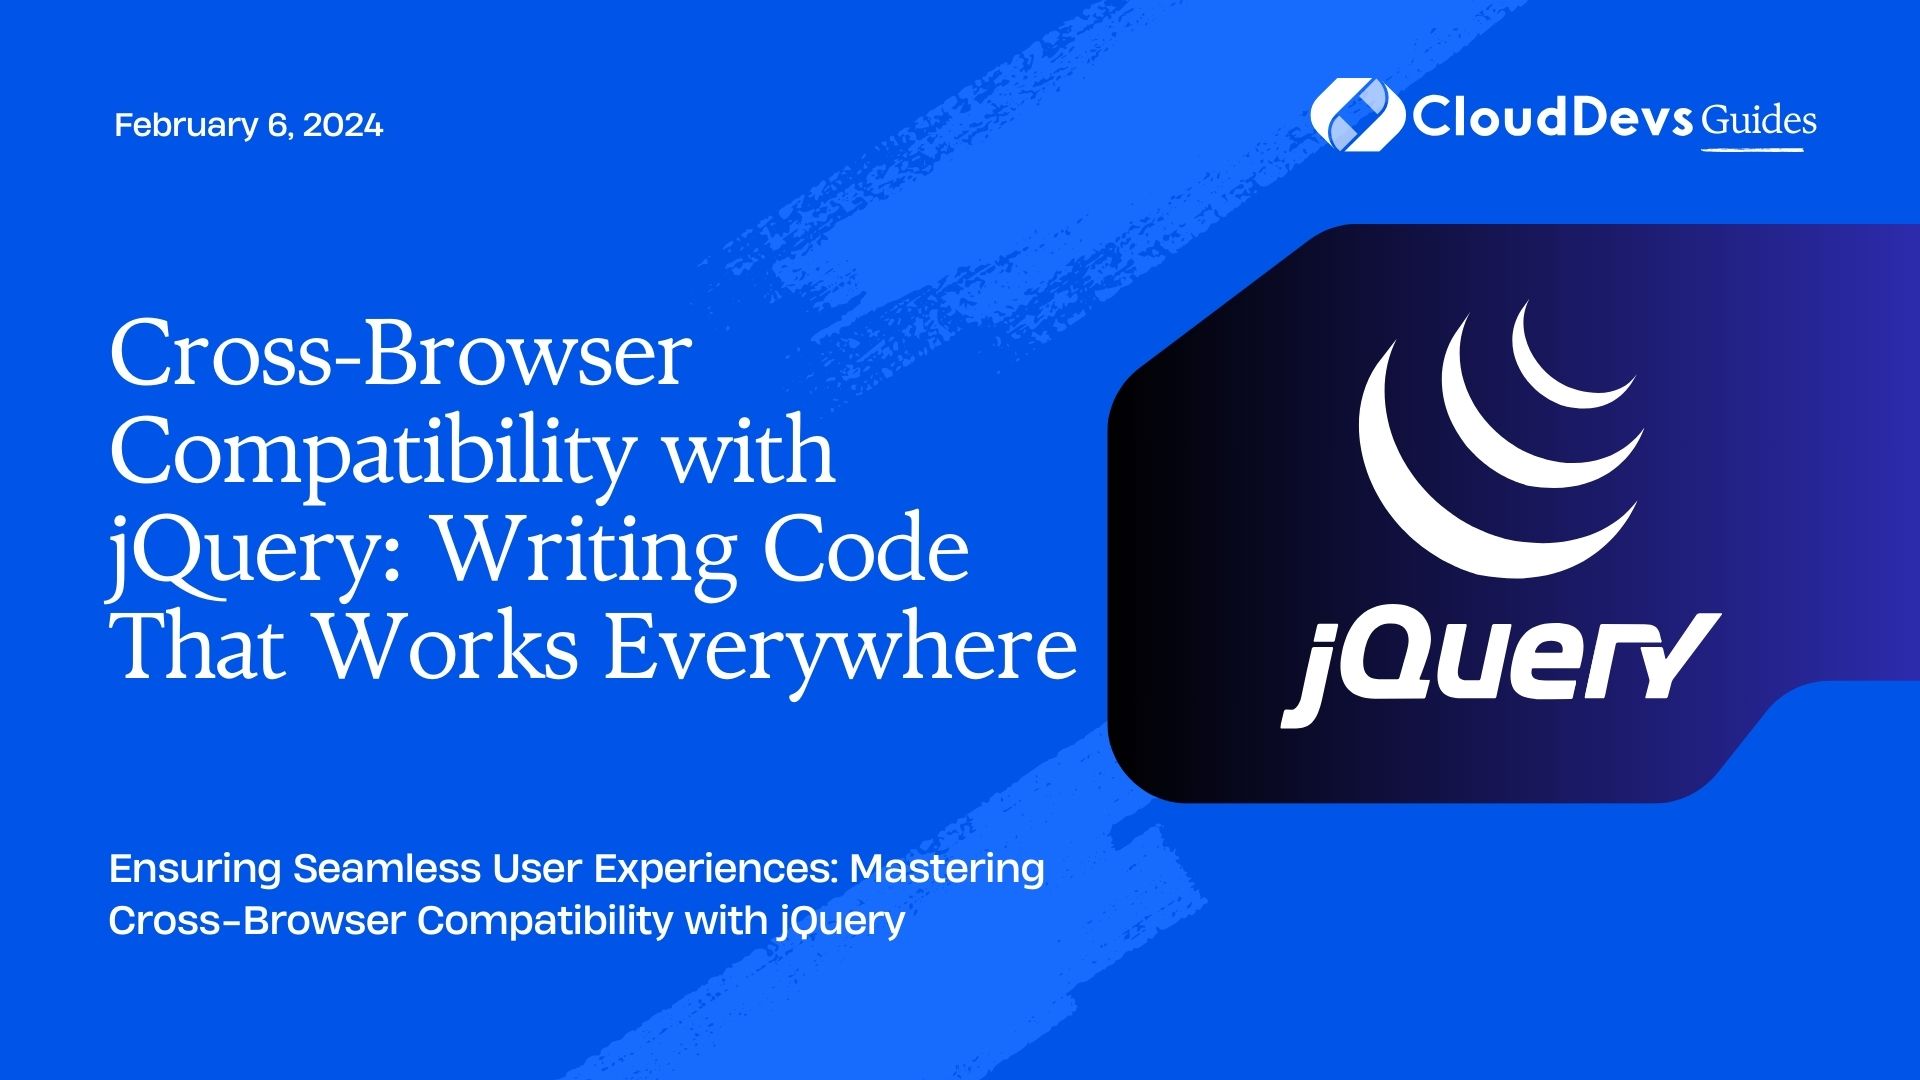 Cross-Browser Compatibility with jQuery: Writing Code That Works Everywhere